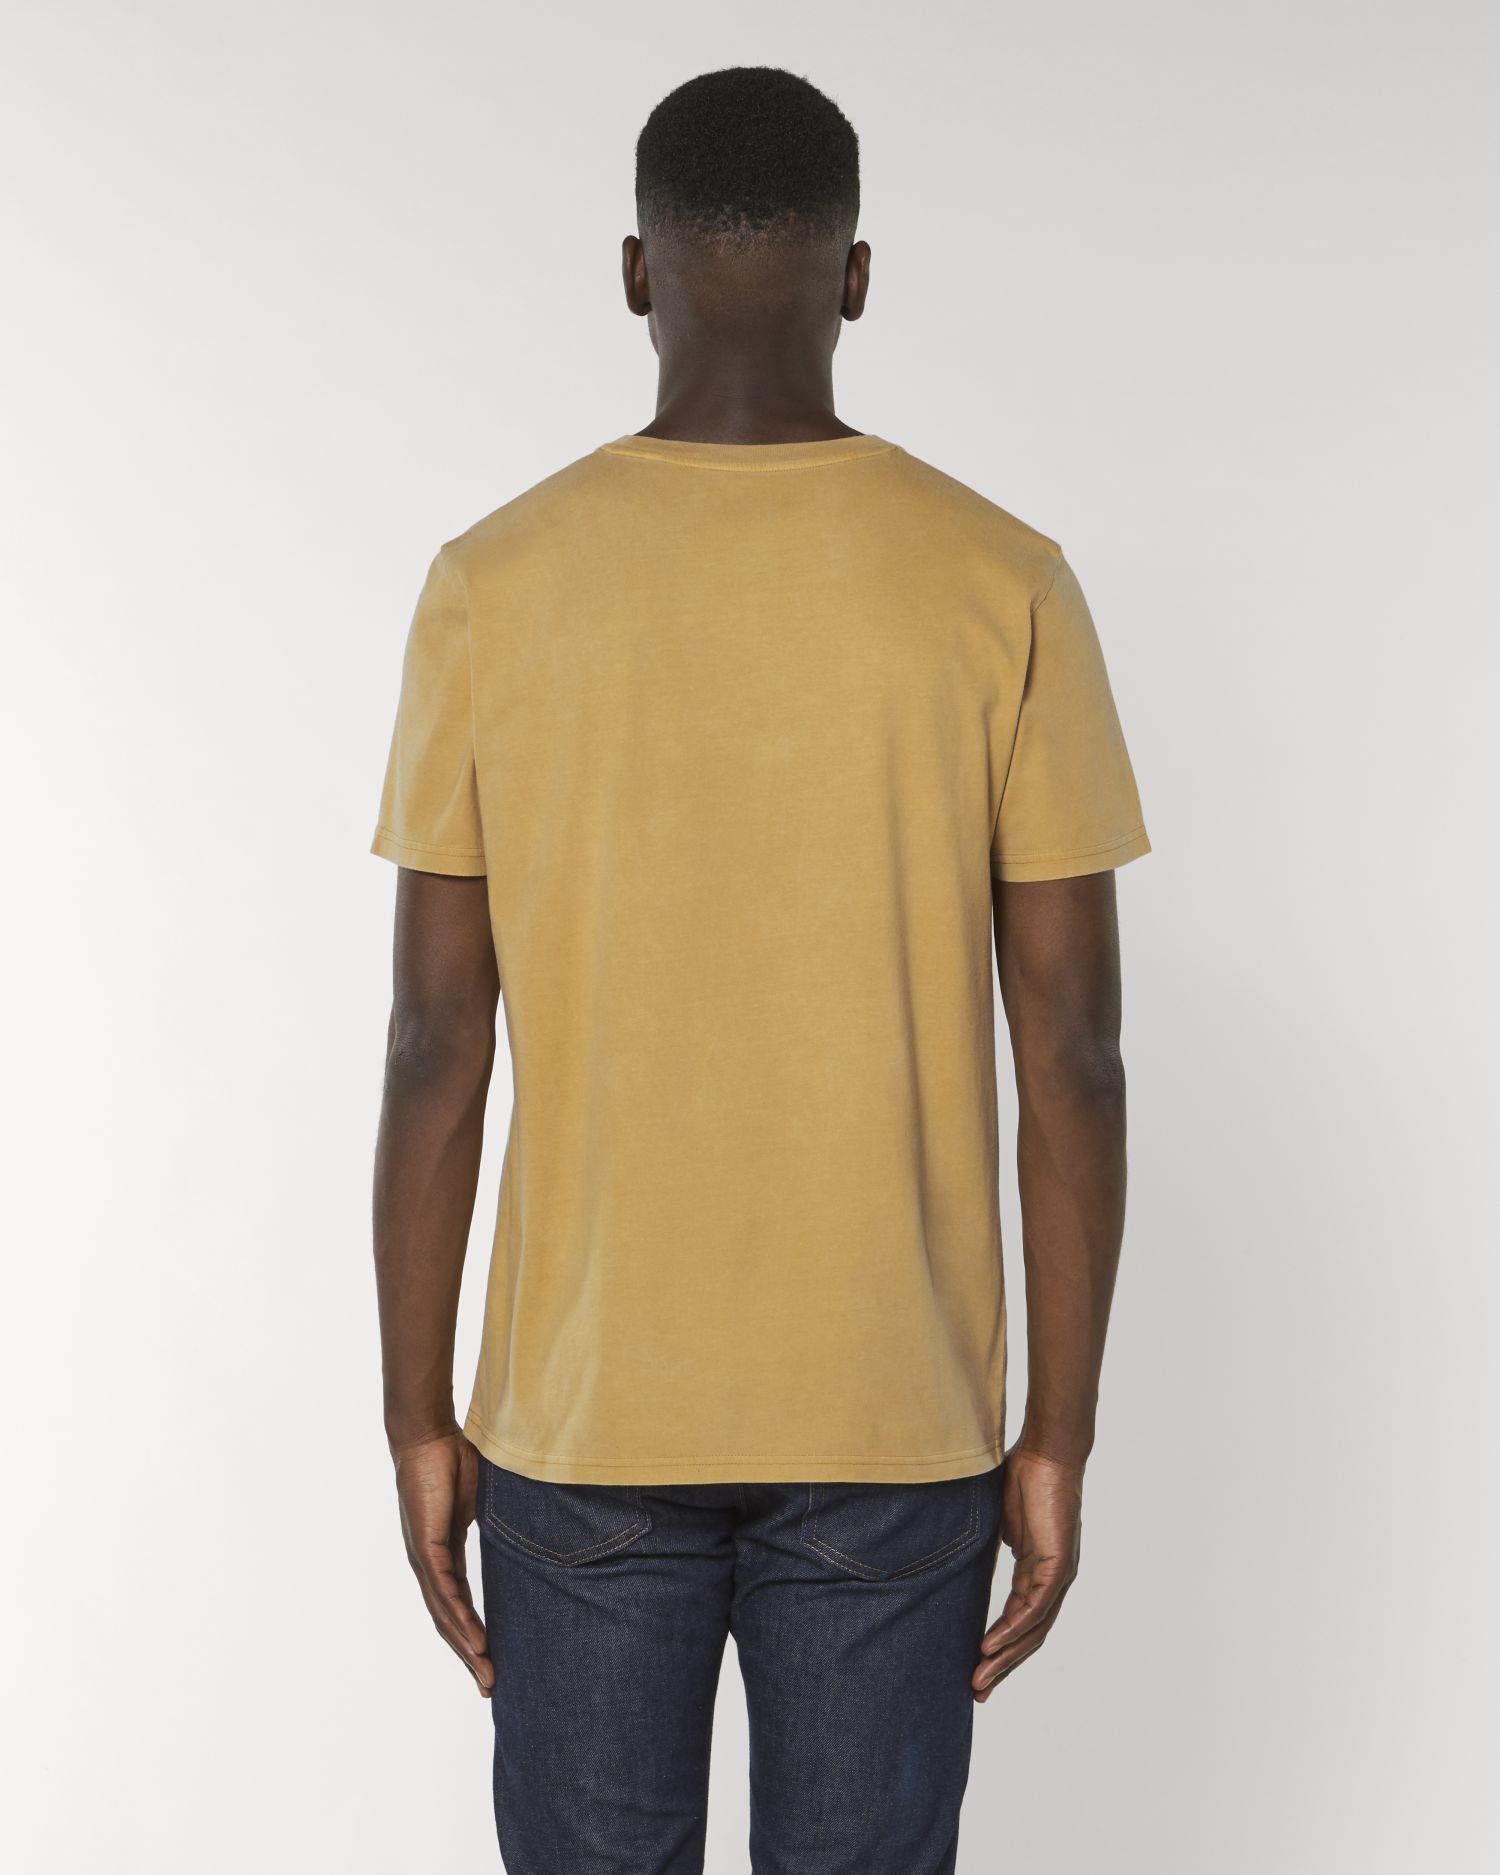 T-Shirt Creator Vintage in Farbe G. Dyed Ochre